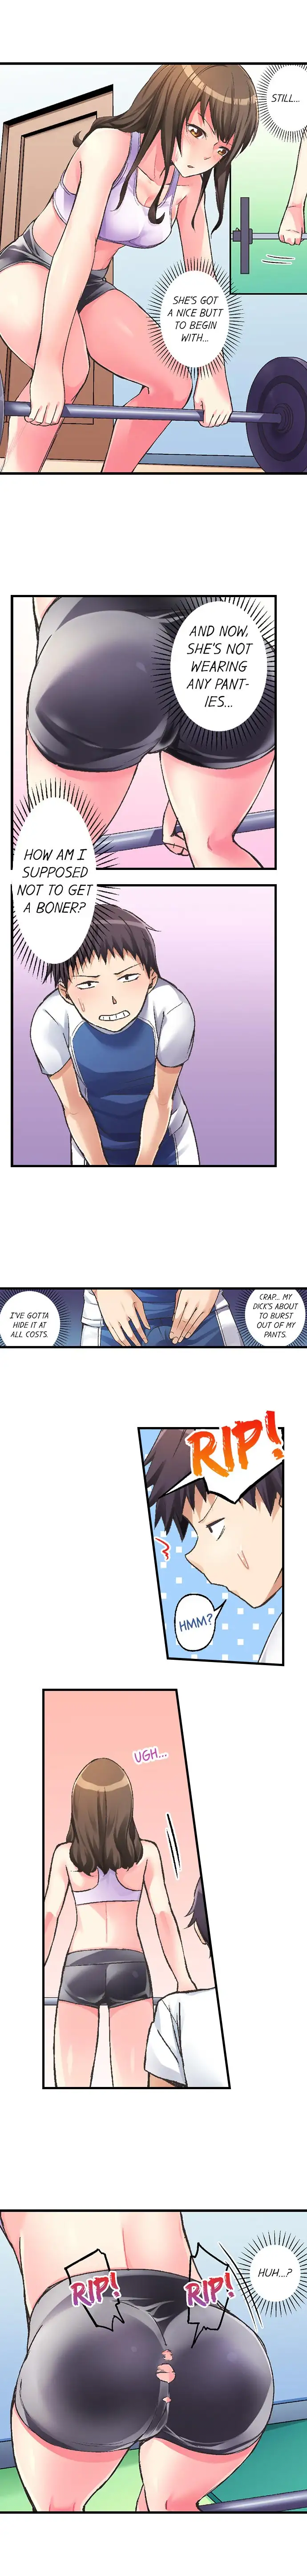 No Panty Booty Workout! - Chapter 2 Page 7